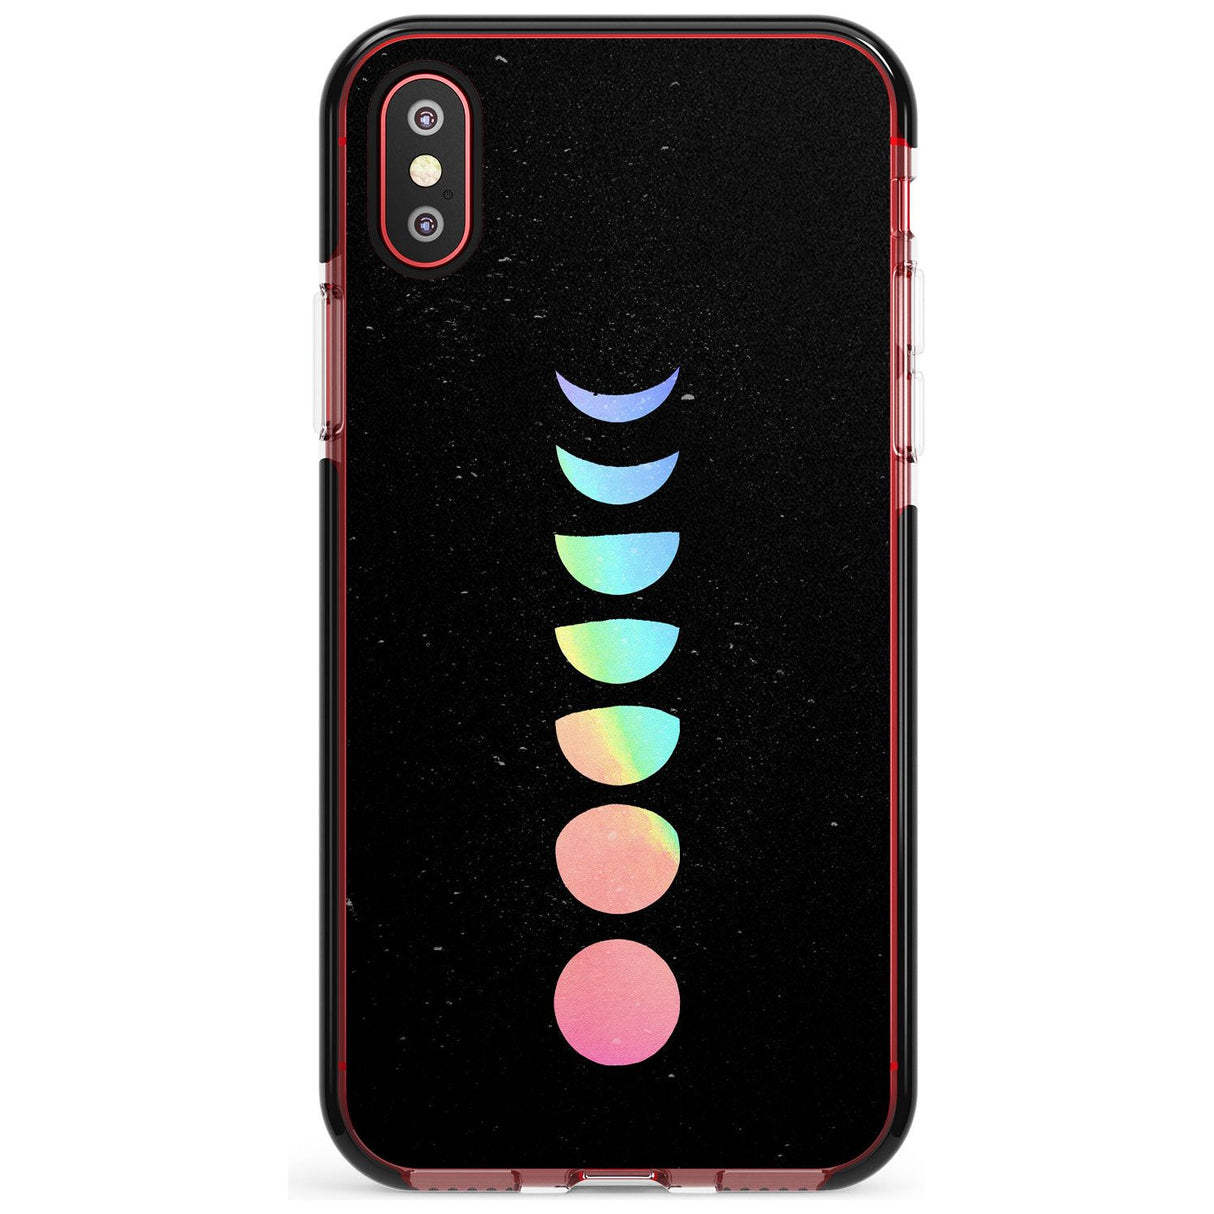 Pastel Moon Phases Pink Fade Impact Phone Case for iPhone X XS Max XR